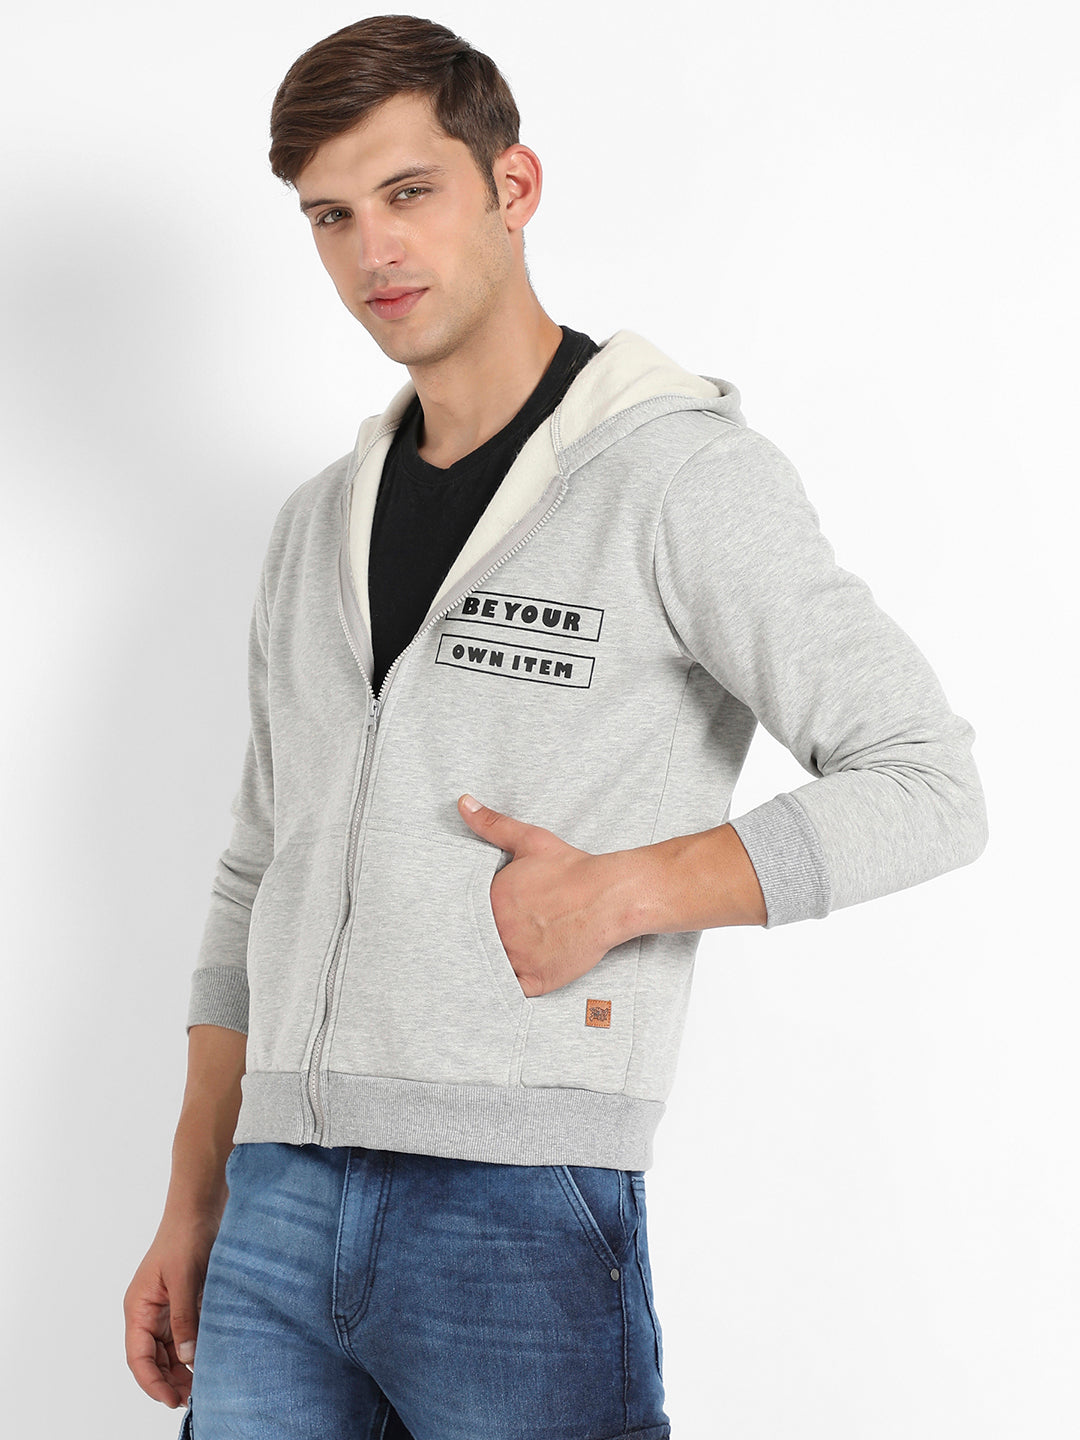 Be Your Own Item Hoodie With Insert Pocket